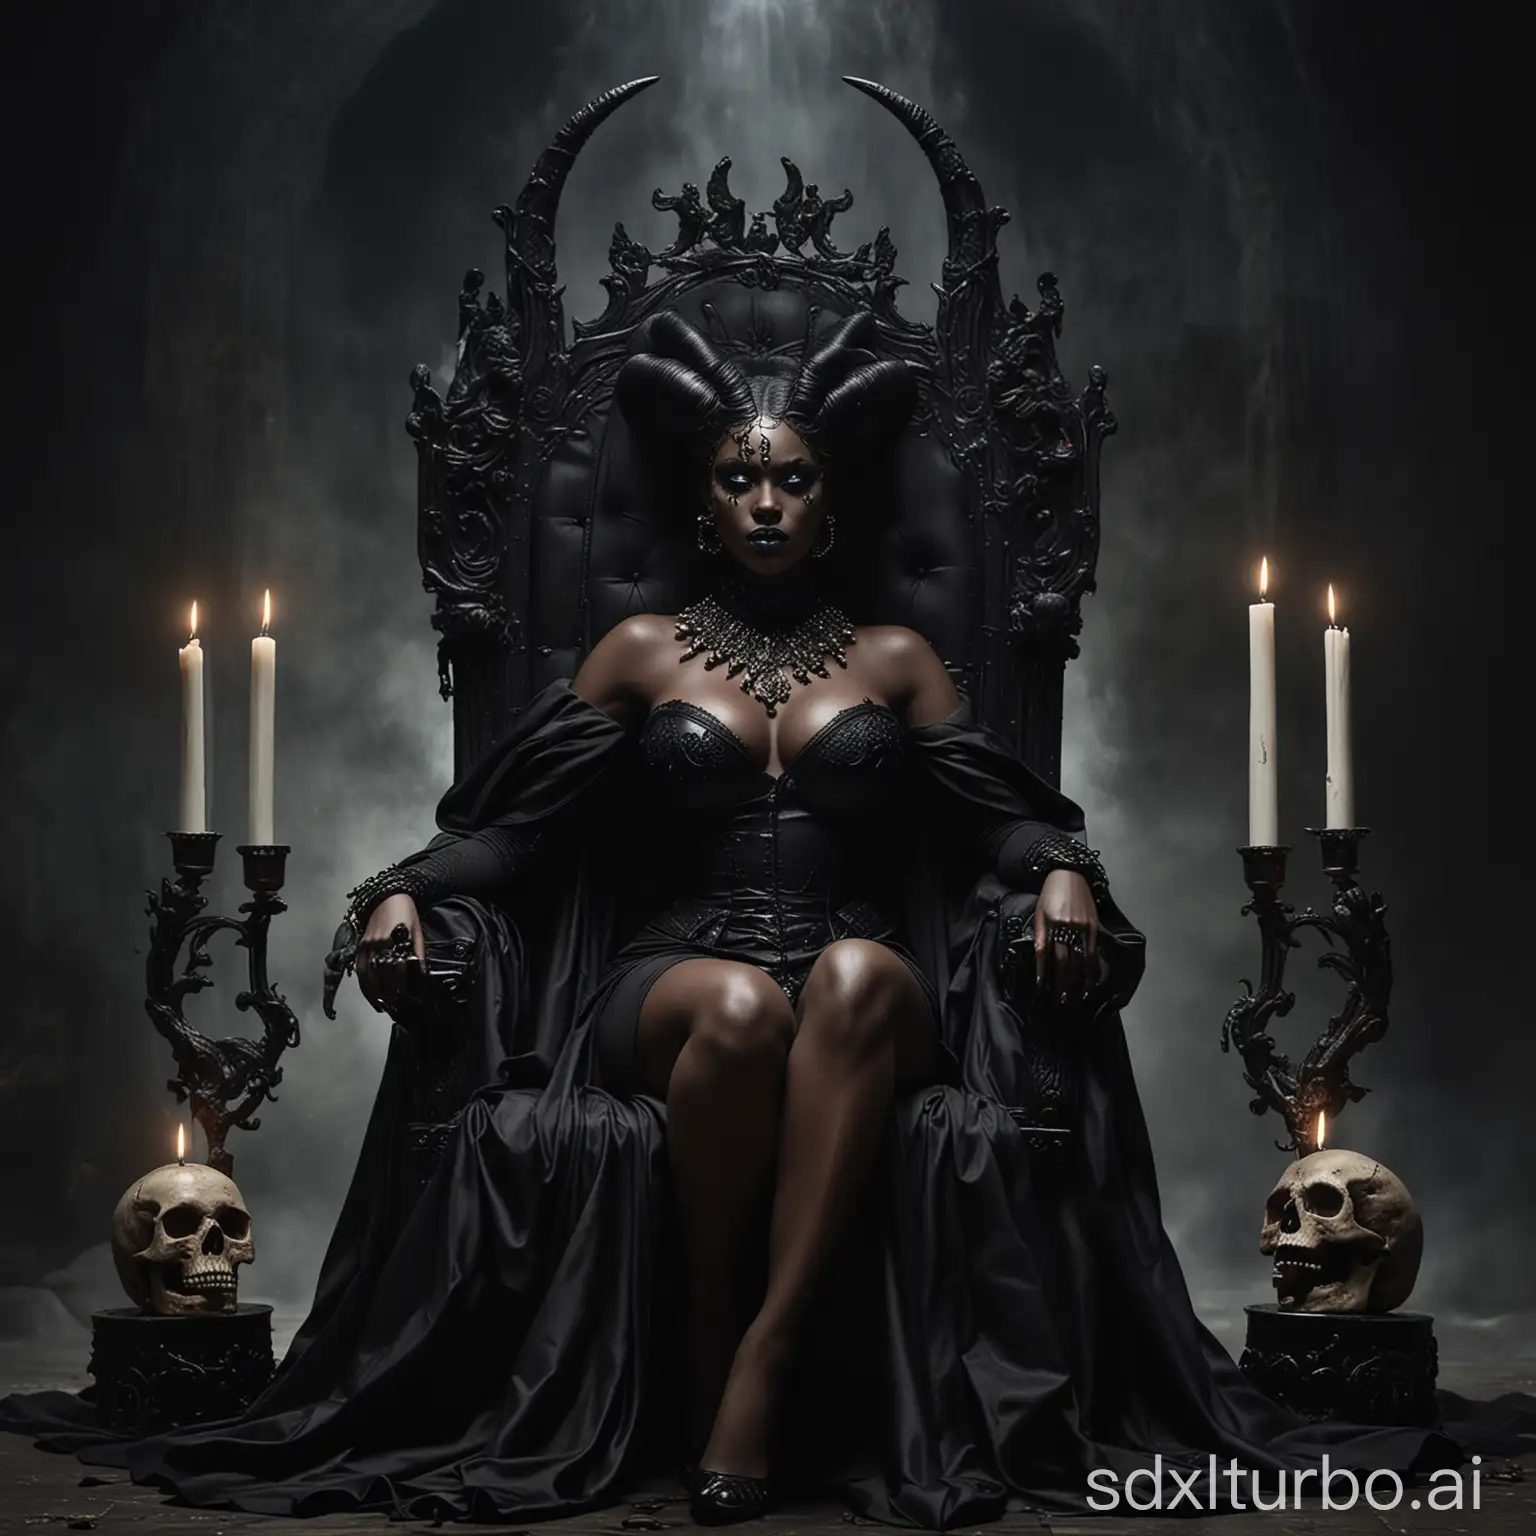 a majestic and powerful black woman, black makeup, big breasts, exuding an aura of authority. Her imposing presence is accentuated by her mesmerizing horns, sitting majestically on a black throne, whose intricately detailed seat adds to the air of mystique. Her dark costume and black cape with a high collar further accentuate her imposing presence, she wears high heels. The enchanting atmosphere is deepened by two skulls on either side, each with a lit black candle that casts mysterious shadows. This captivating scene masterfully combines mystery, power